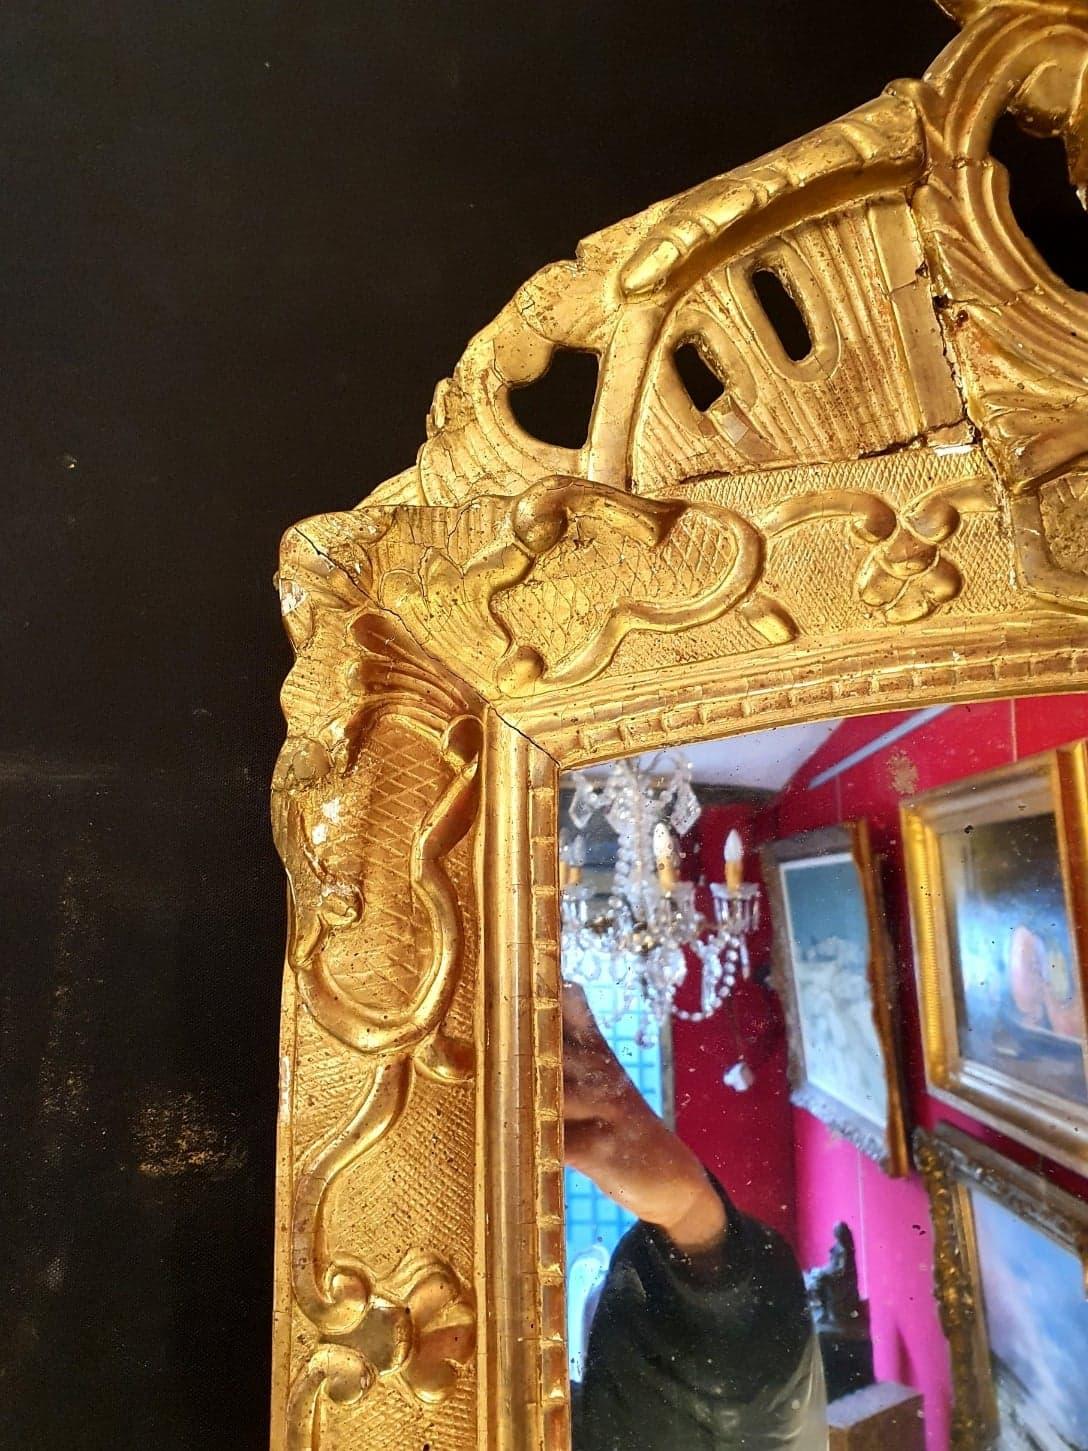 This pediment mirror is from the Regency period. It is entirely in carved and gilded wood. Also, this mirror has a pediment with floral decorations and is in good condition. In addition, the mirror is original and rests on its original parquet.